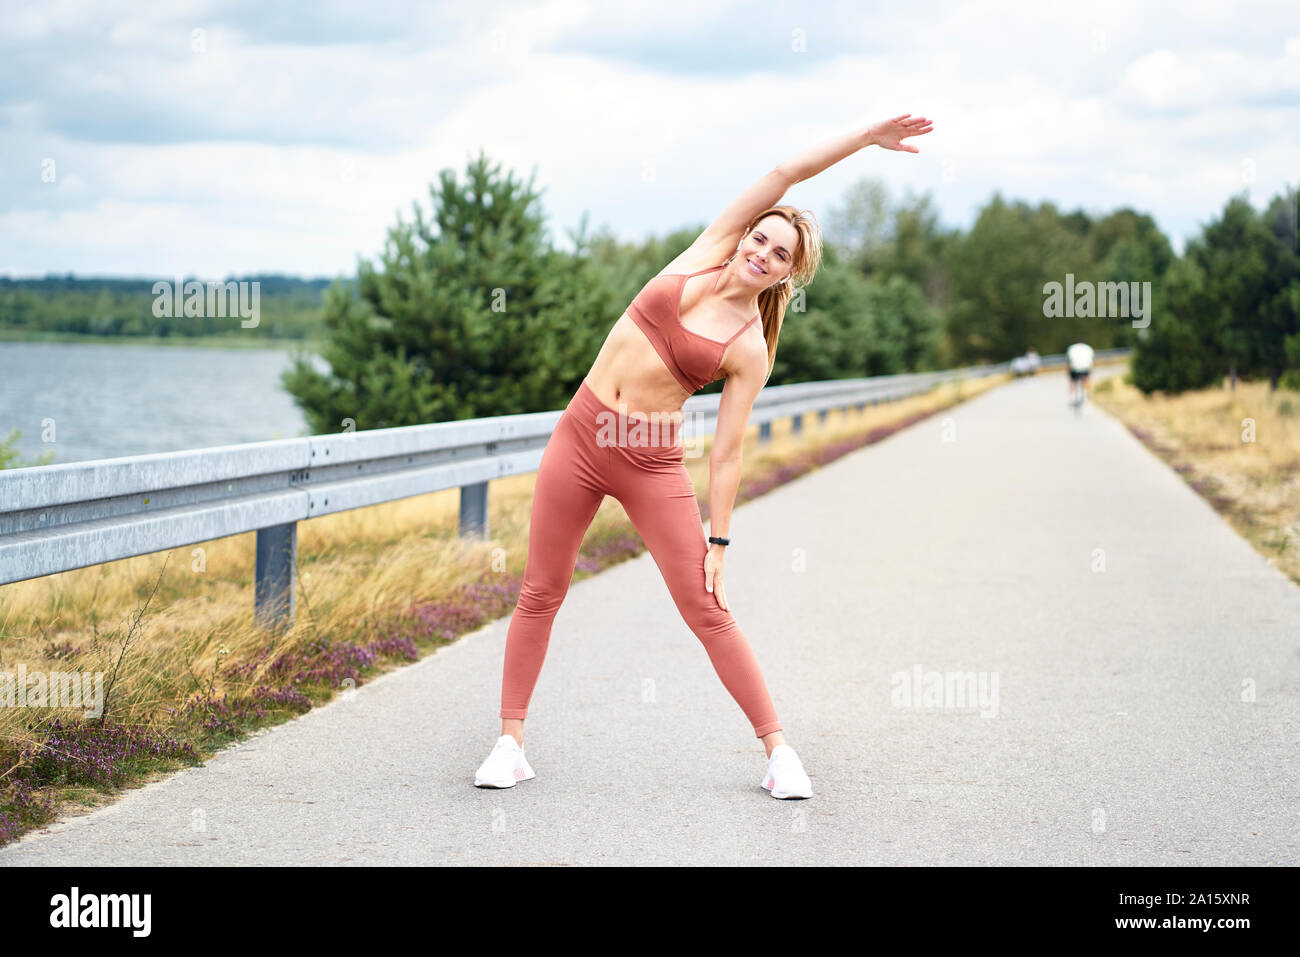 Woman stretching before outdoor training session Stock Photo